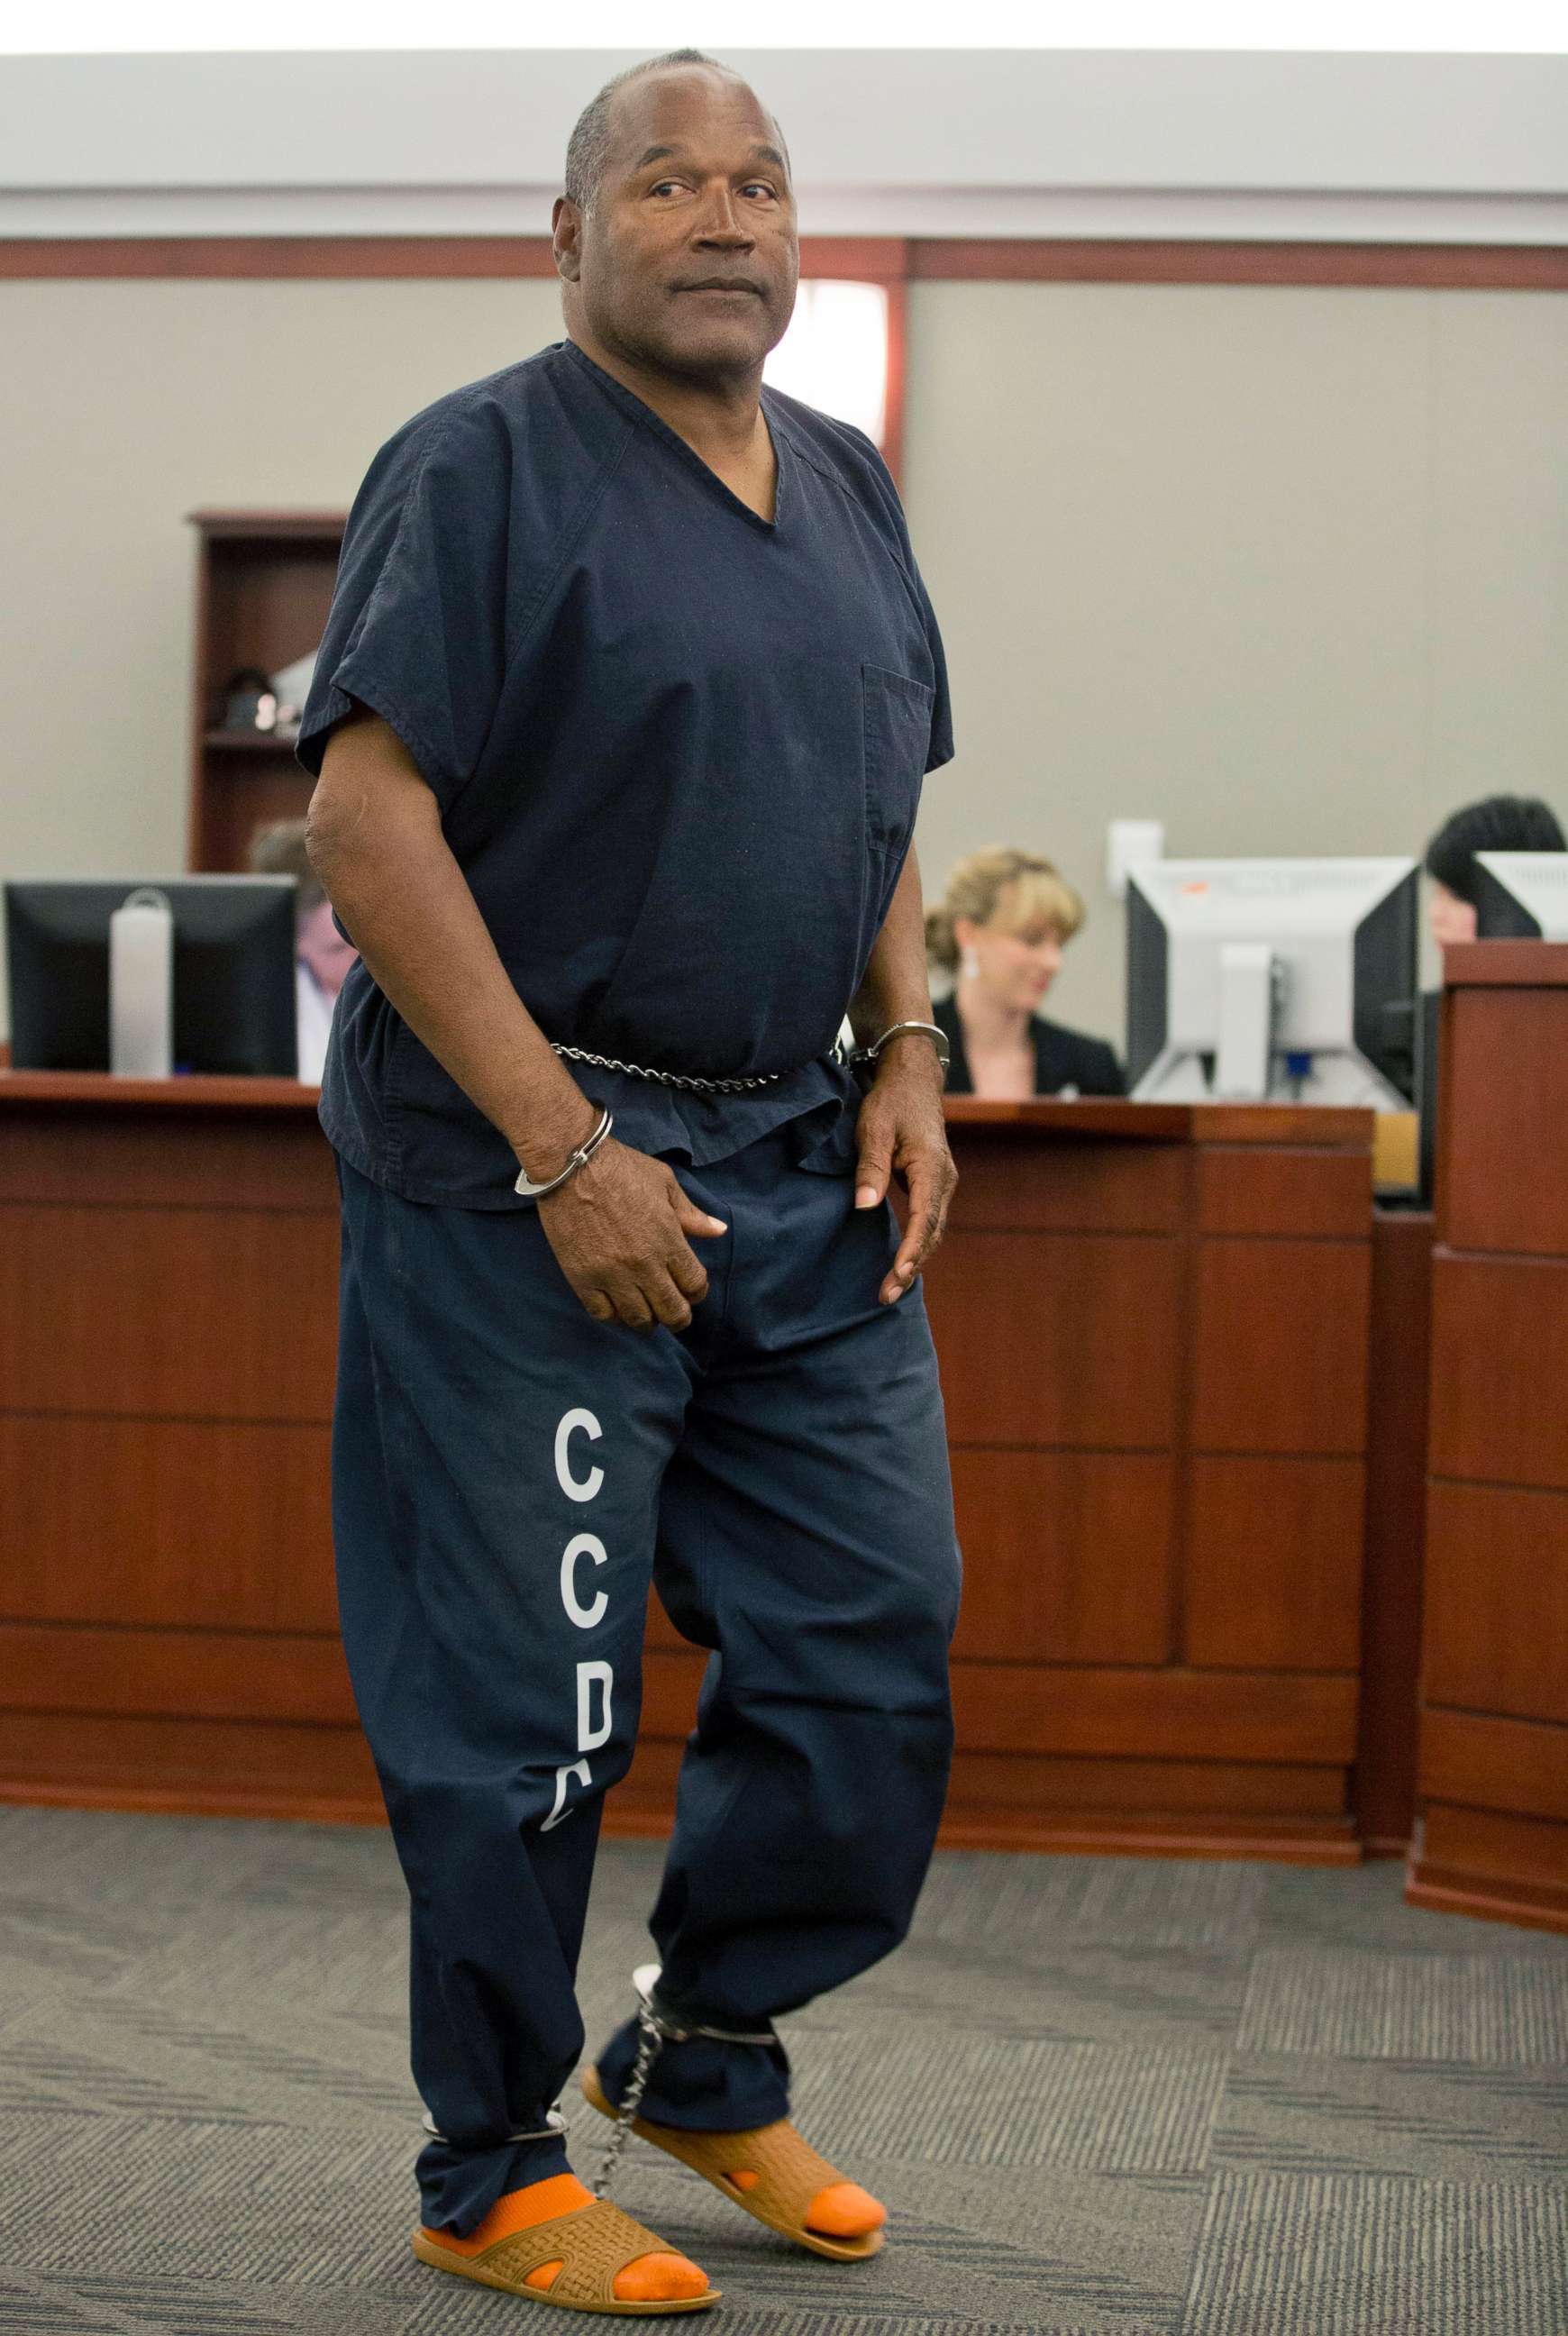 PHOTO: O.J. Simpson returns to the witness stand to testify after a break during an evidentiary hearing in Clark County District Court in Las Vegas, May 15, 2013.